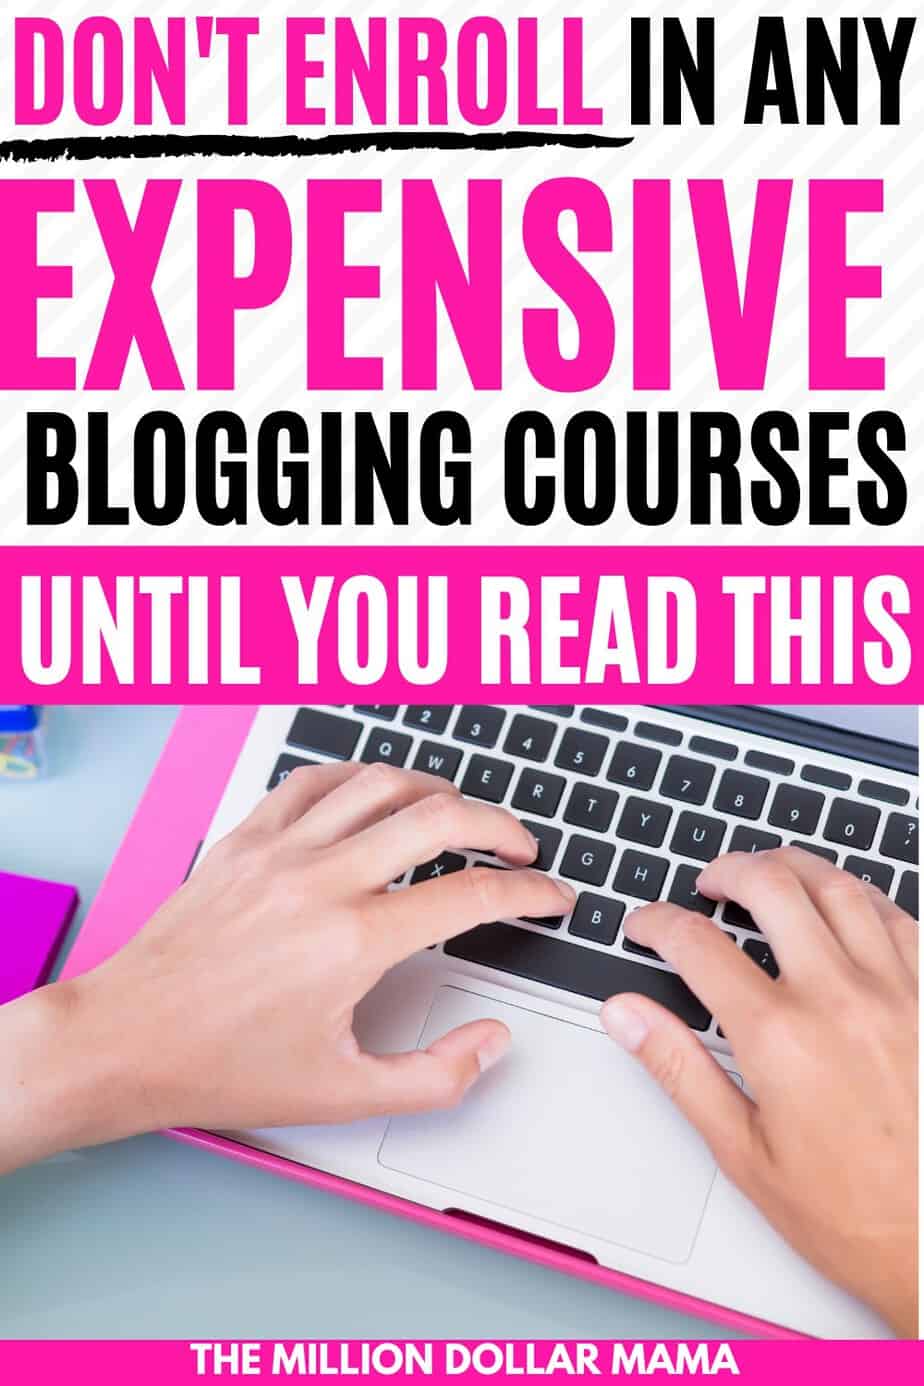 Blogging for Beginners - There are countless expensive blogging courses out there that promise to teach you how to make money blogging. Some of them even suggest you take out a loan to pay for them! Don't enroll in ANY expensive blogging course until you read this!